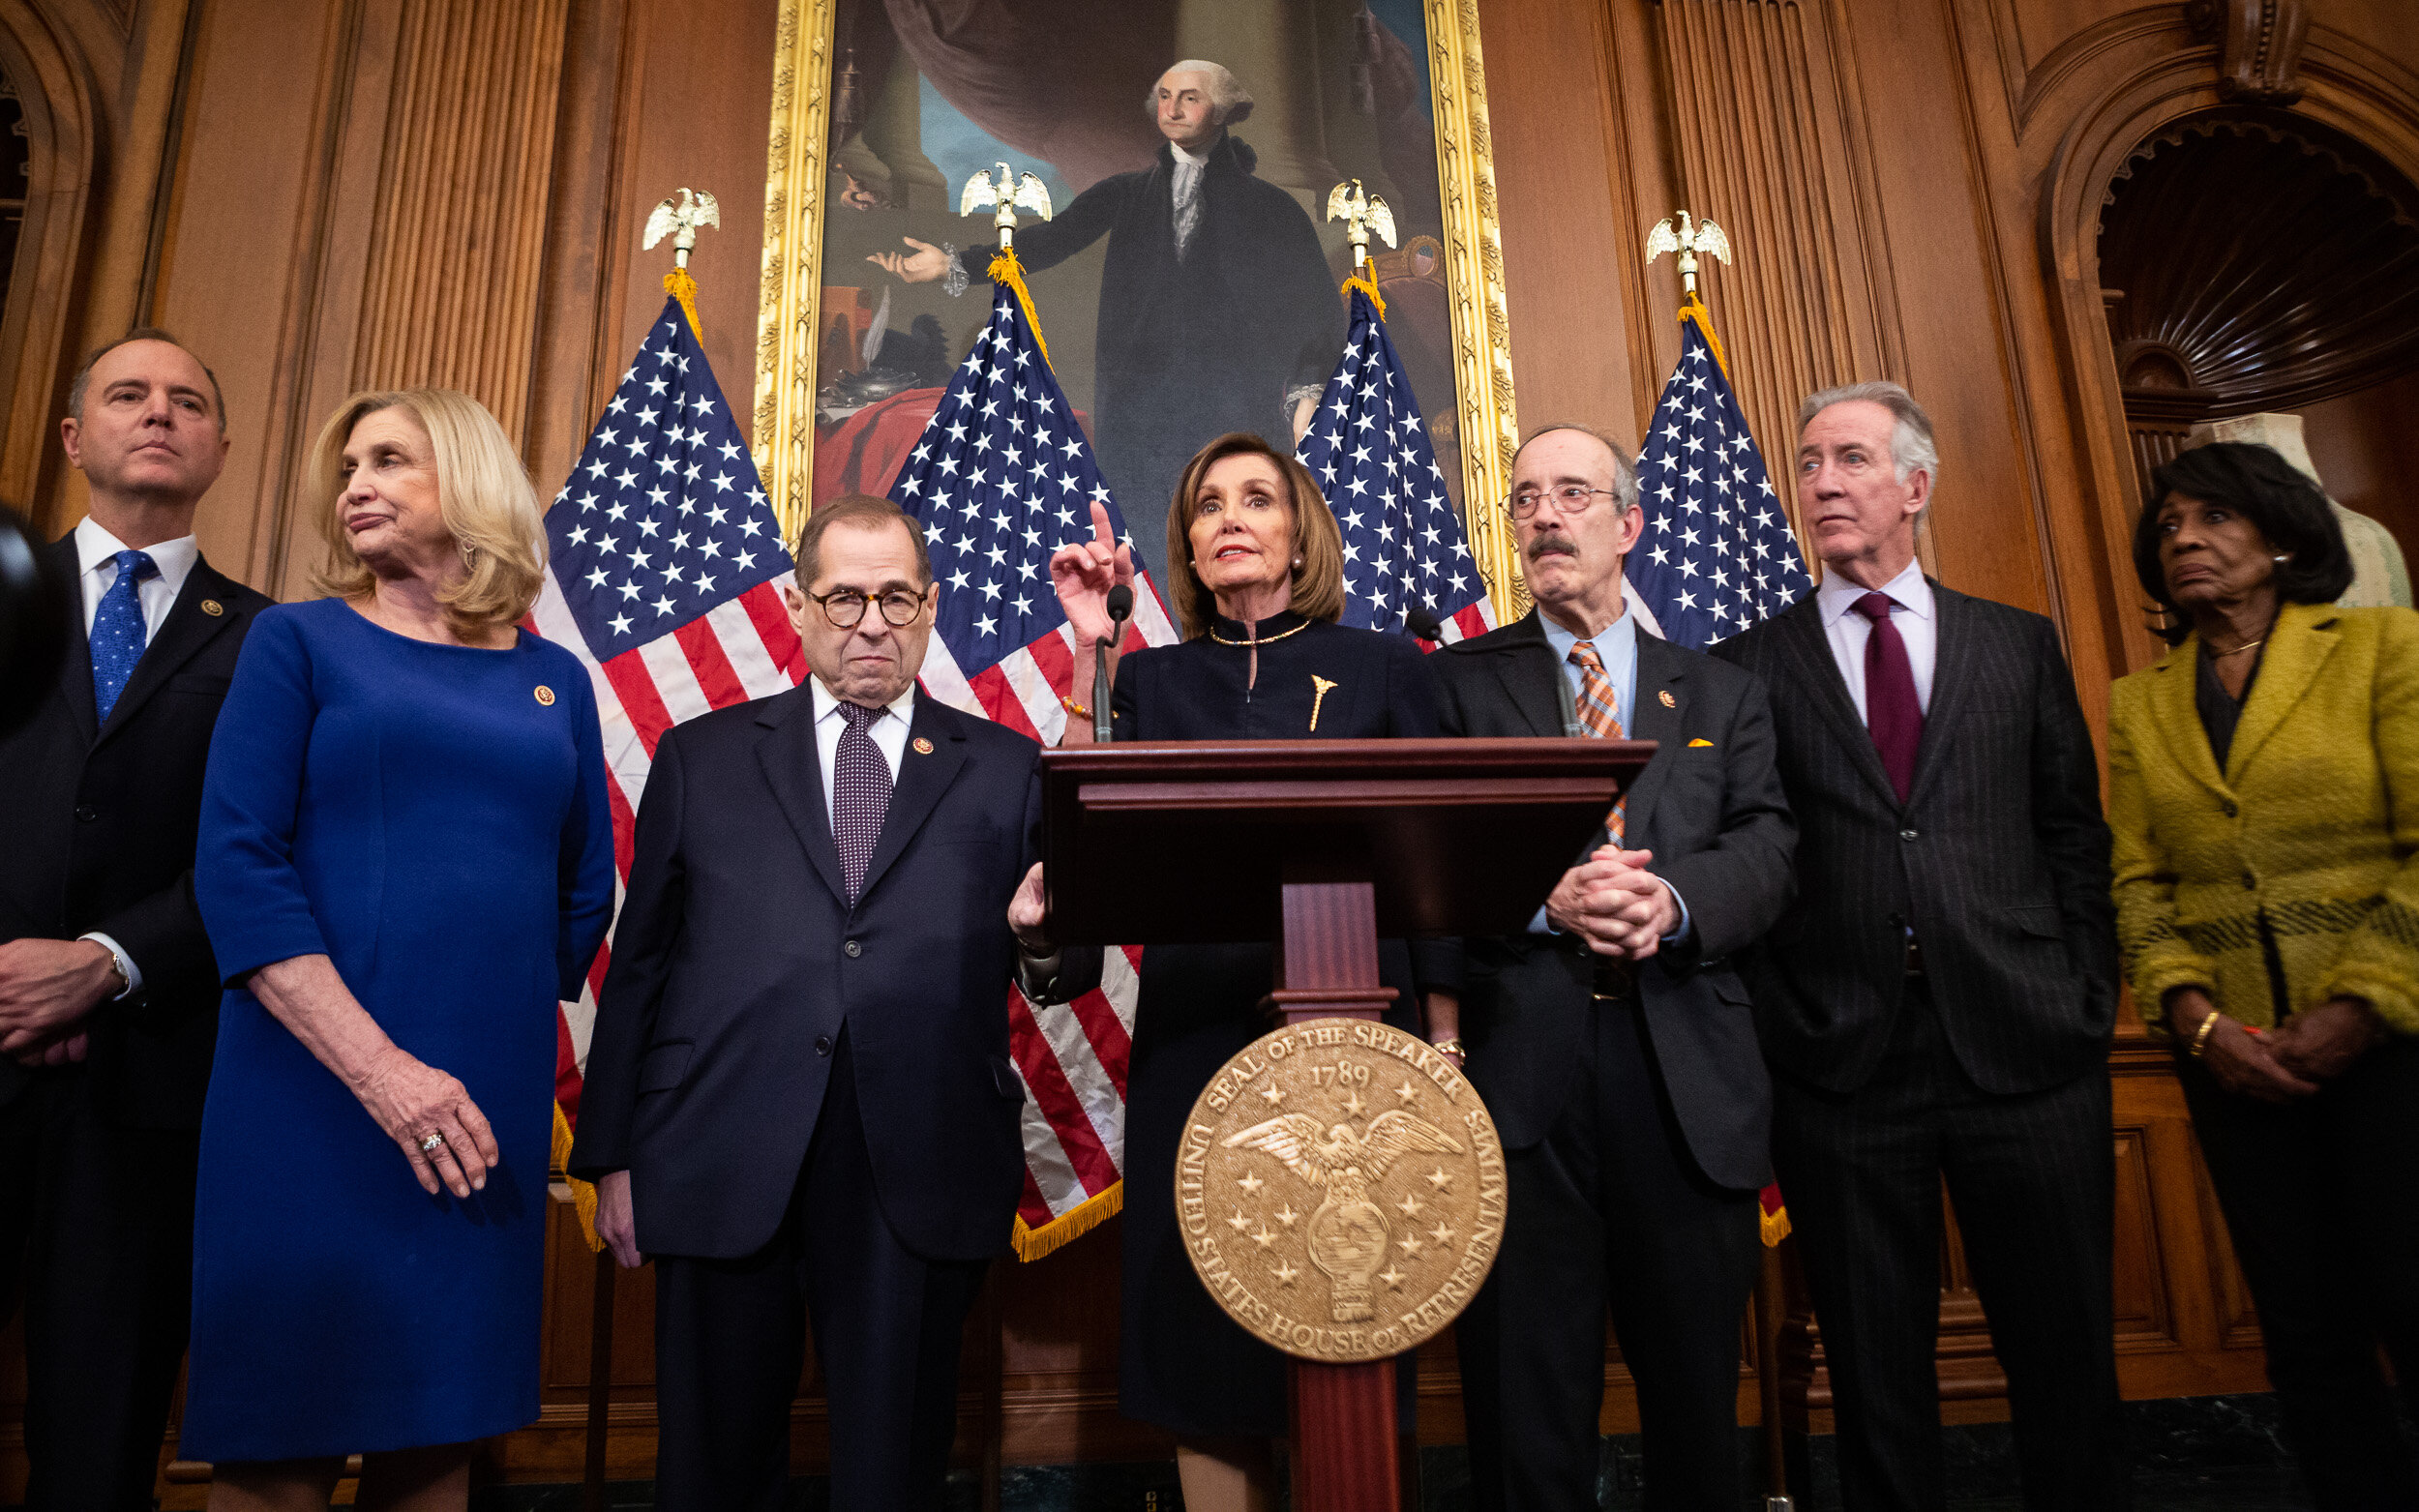  Speaker Nancy Pelosi (D-Calif.) and House committee leaders hold a news conference at the U.S. Capitol after the House passed two articles of impeachment against President Donald Trump Dec. 18, 2019. 